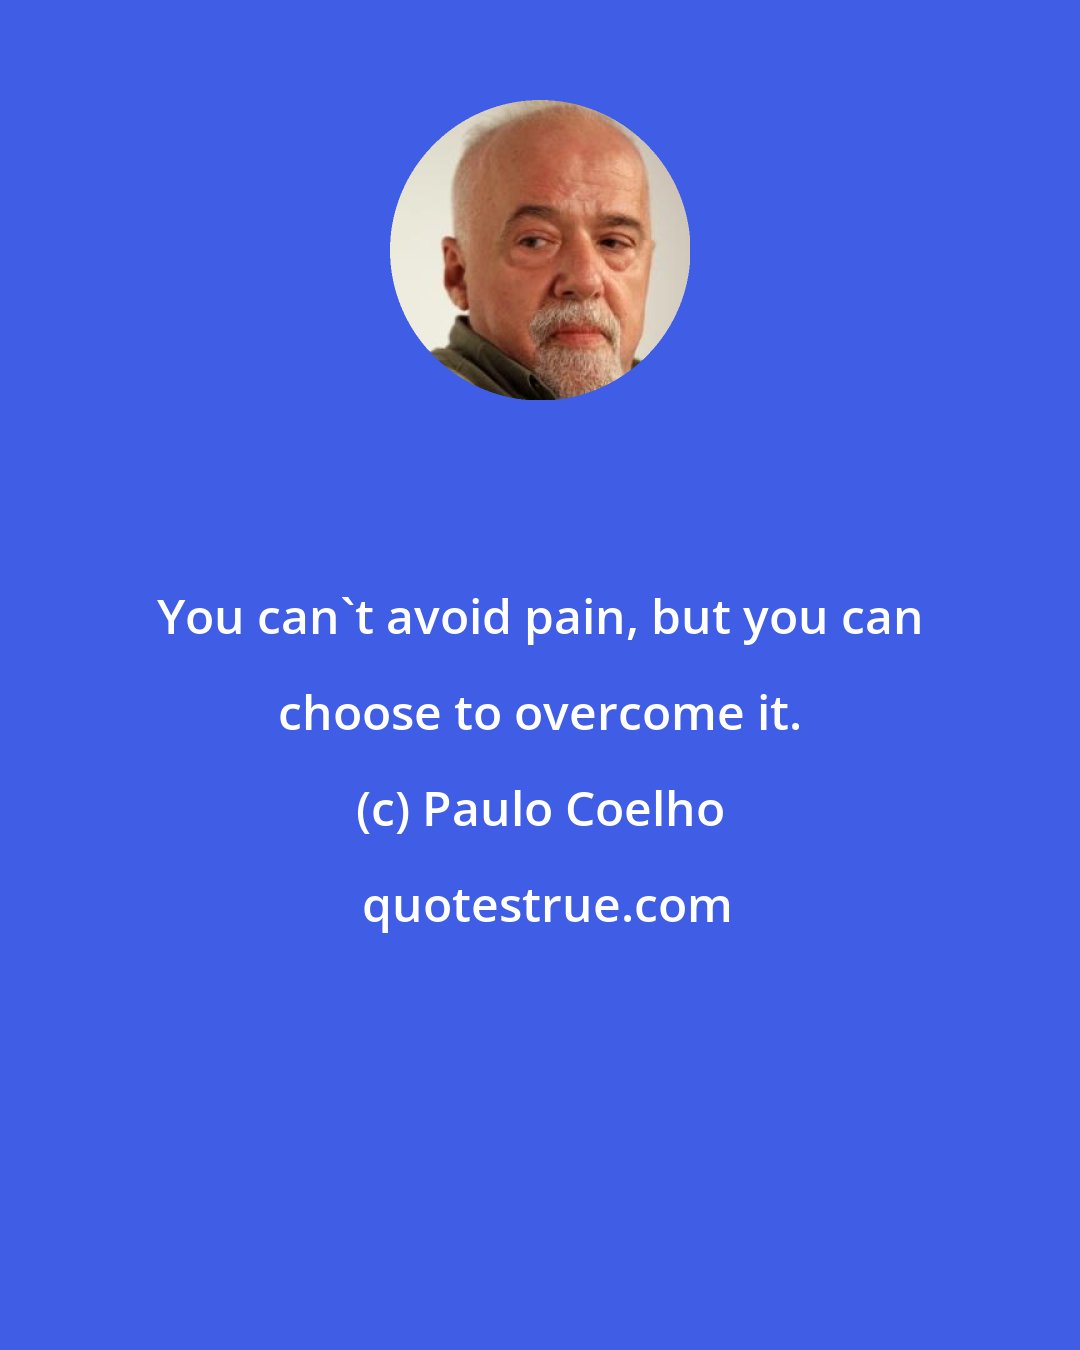 Paulo Coelho: You can't avoid pain, but you can choose to overcome it.